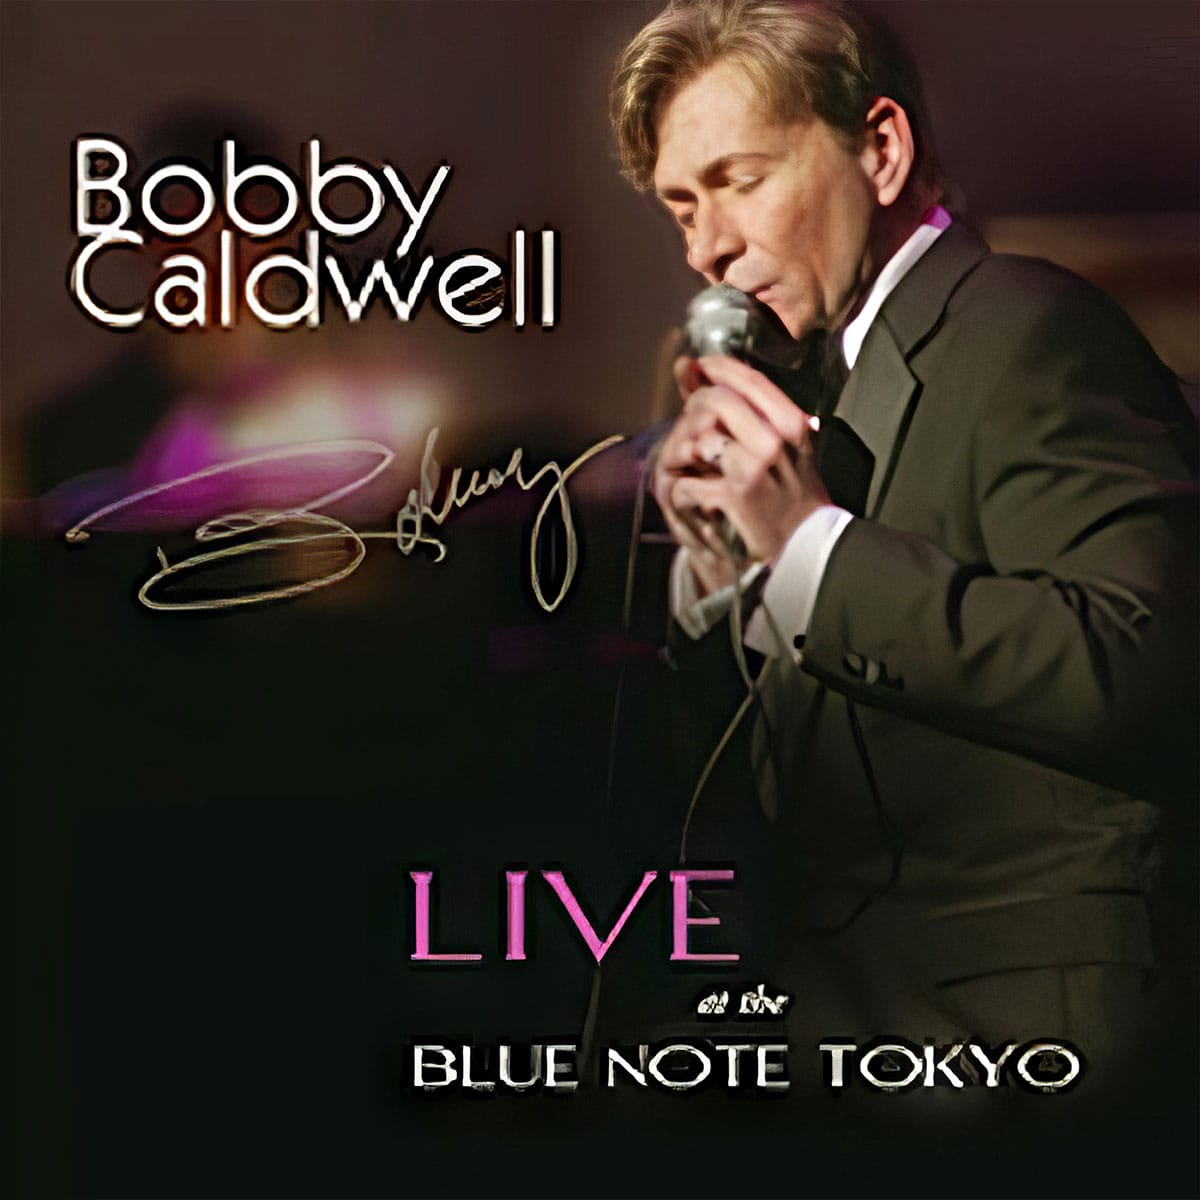 Live at the Blue Note - Bobby Caldwell